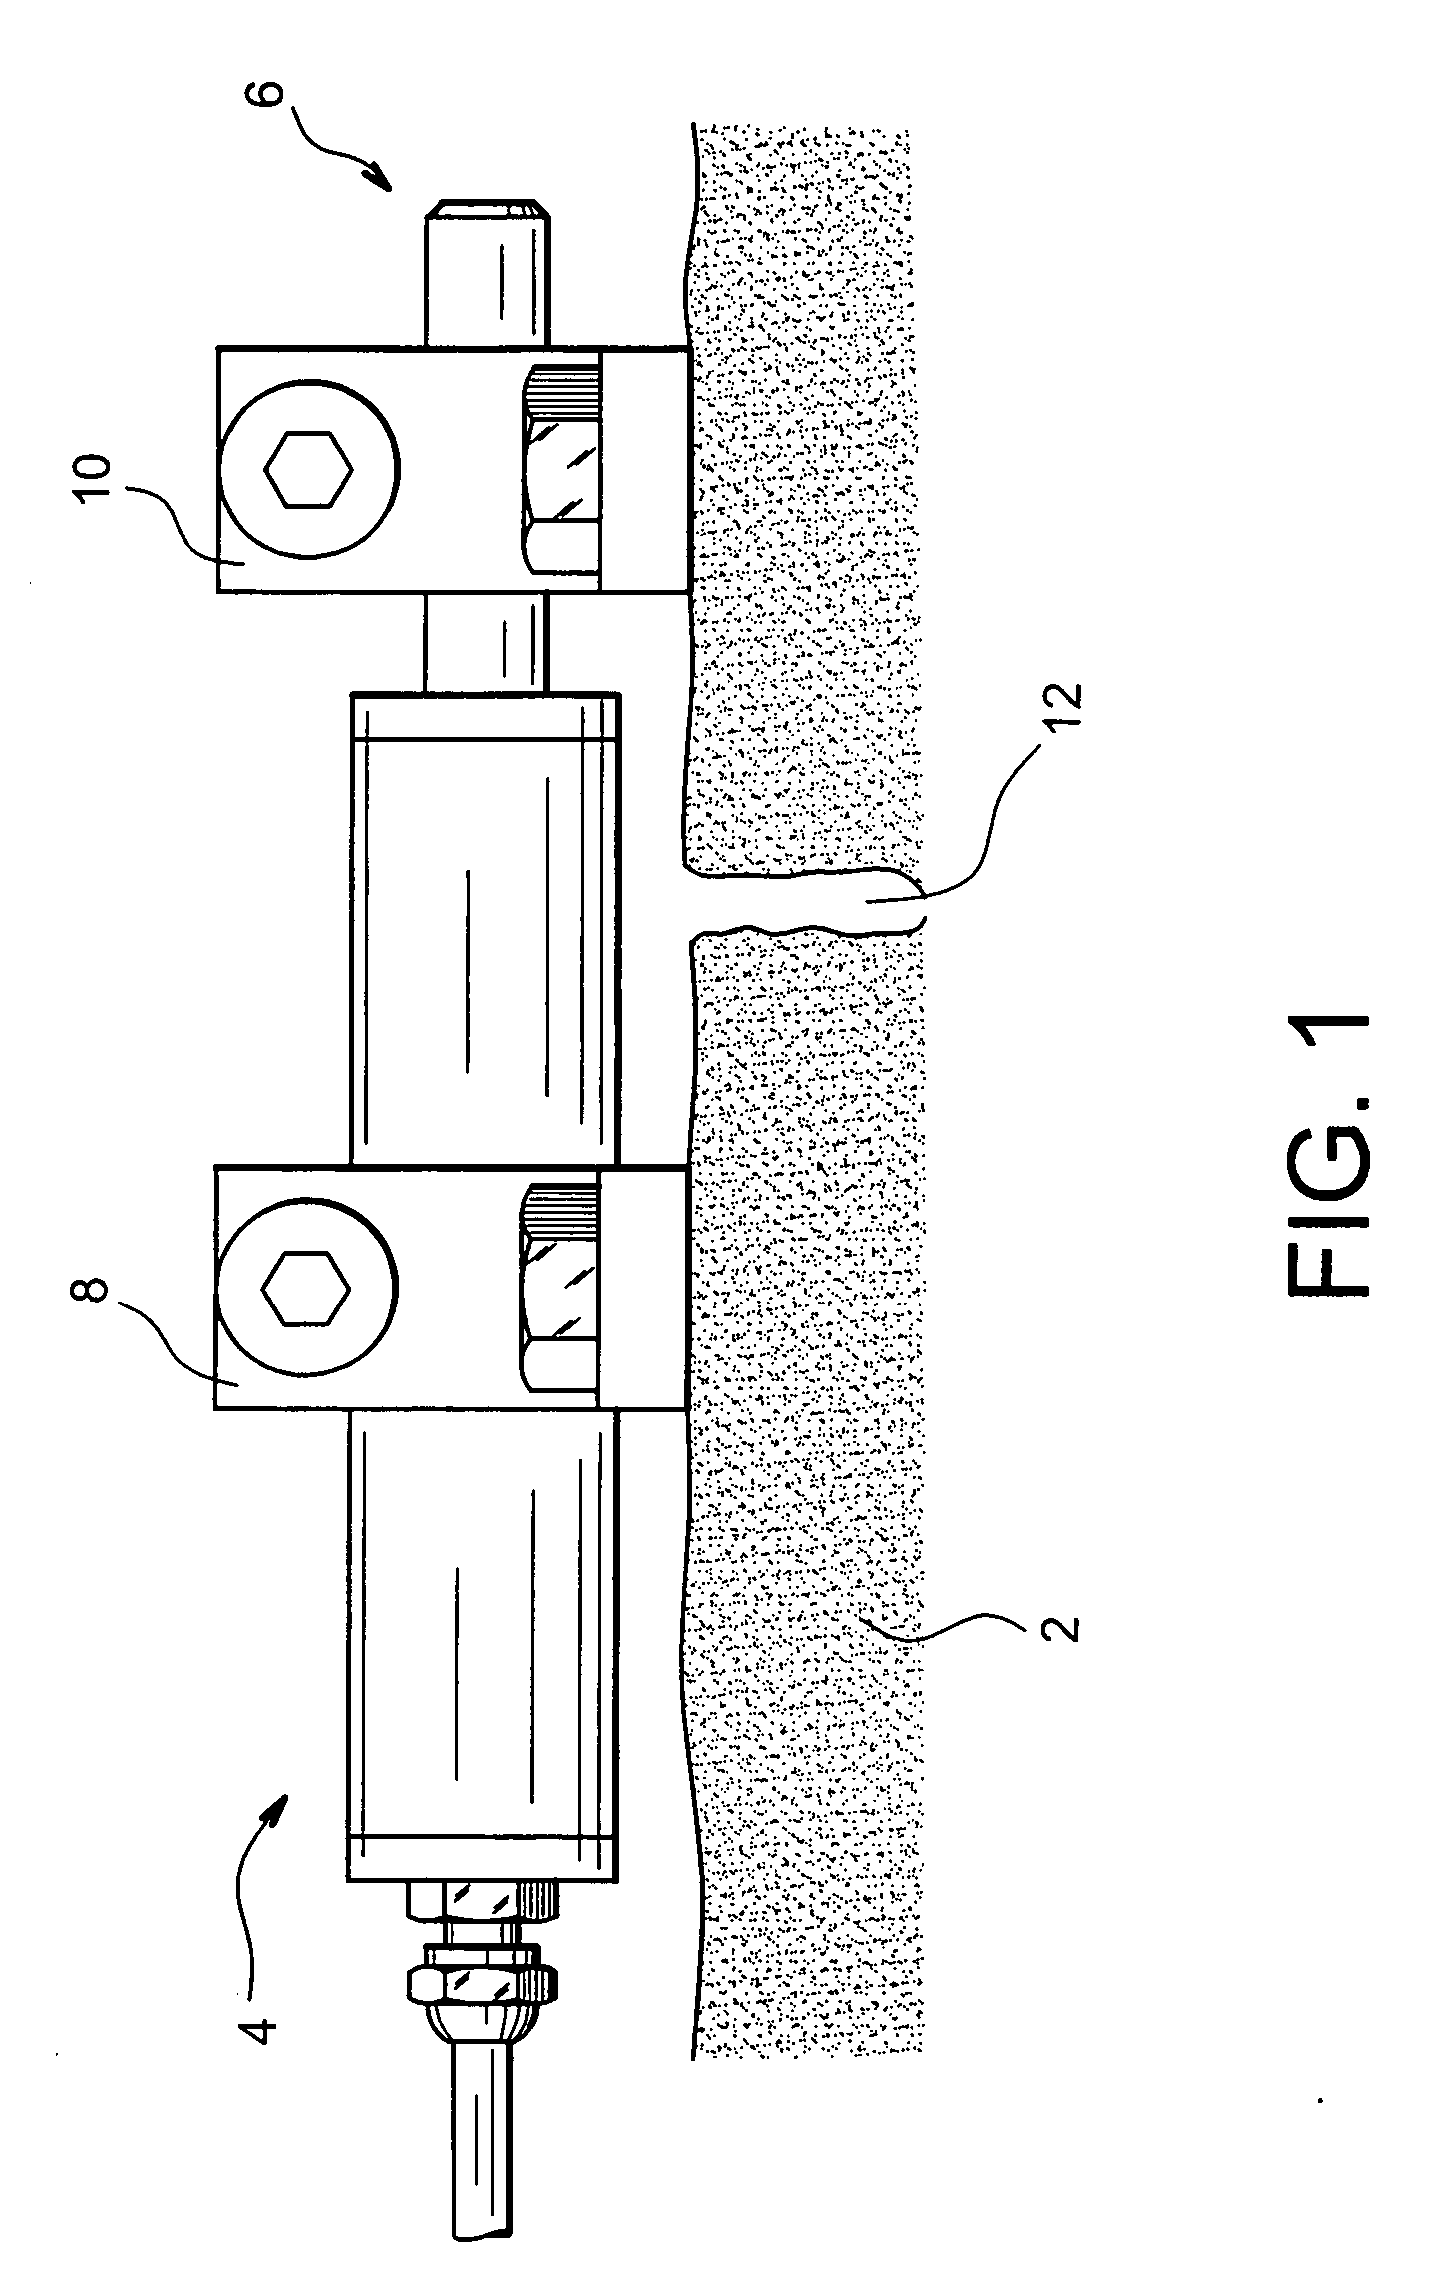 Extensometer comprising a flexible sensing element and bragg gratings